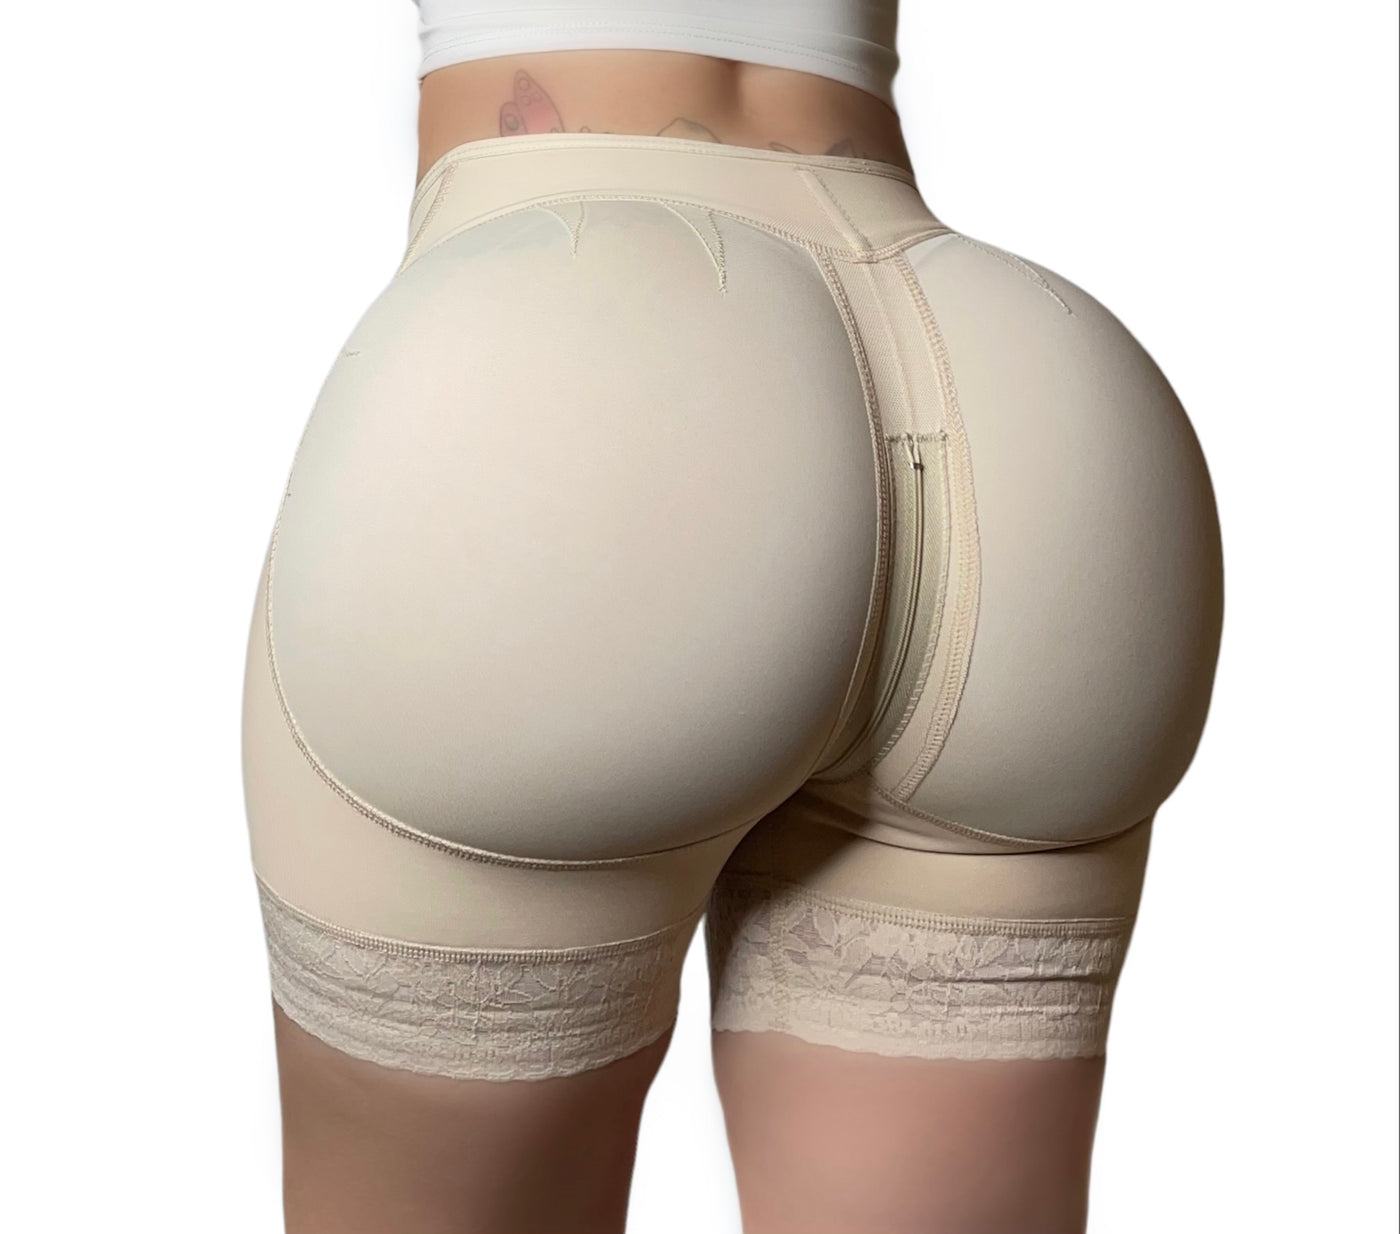 🍑Realistic silicone butt and hips snatcher😍Definitely worth the